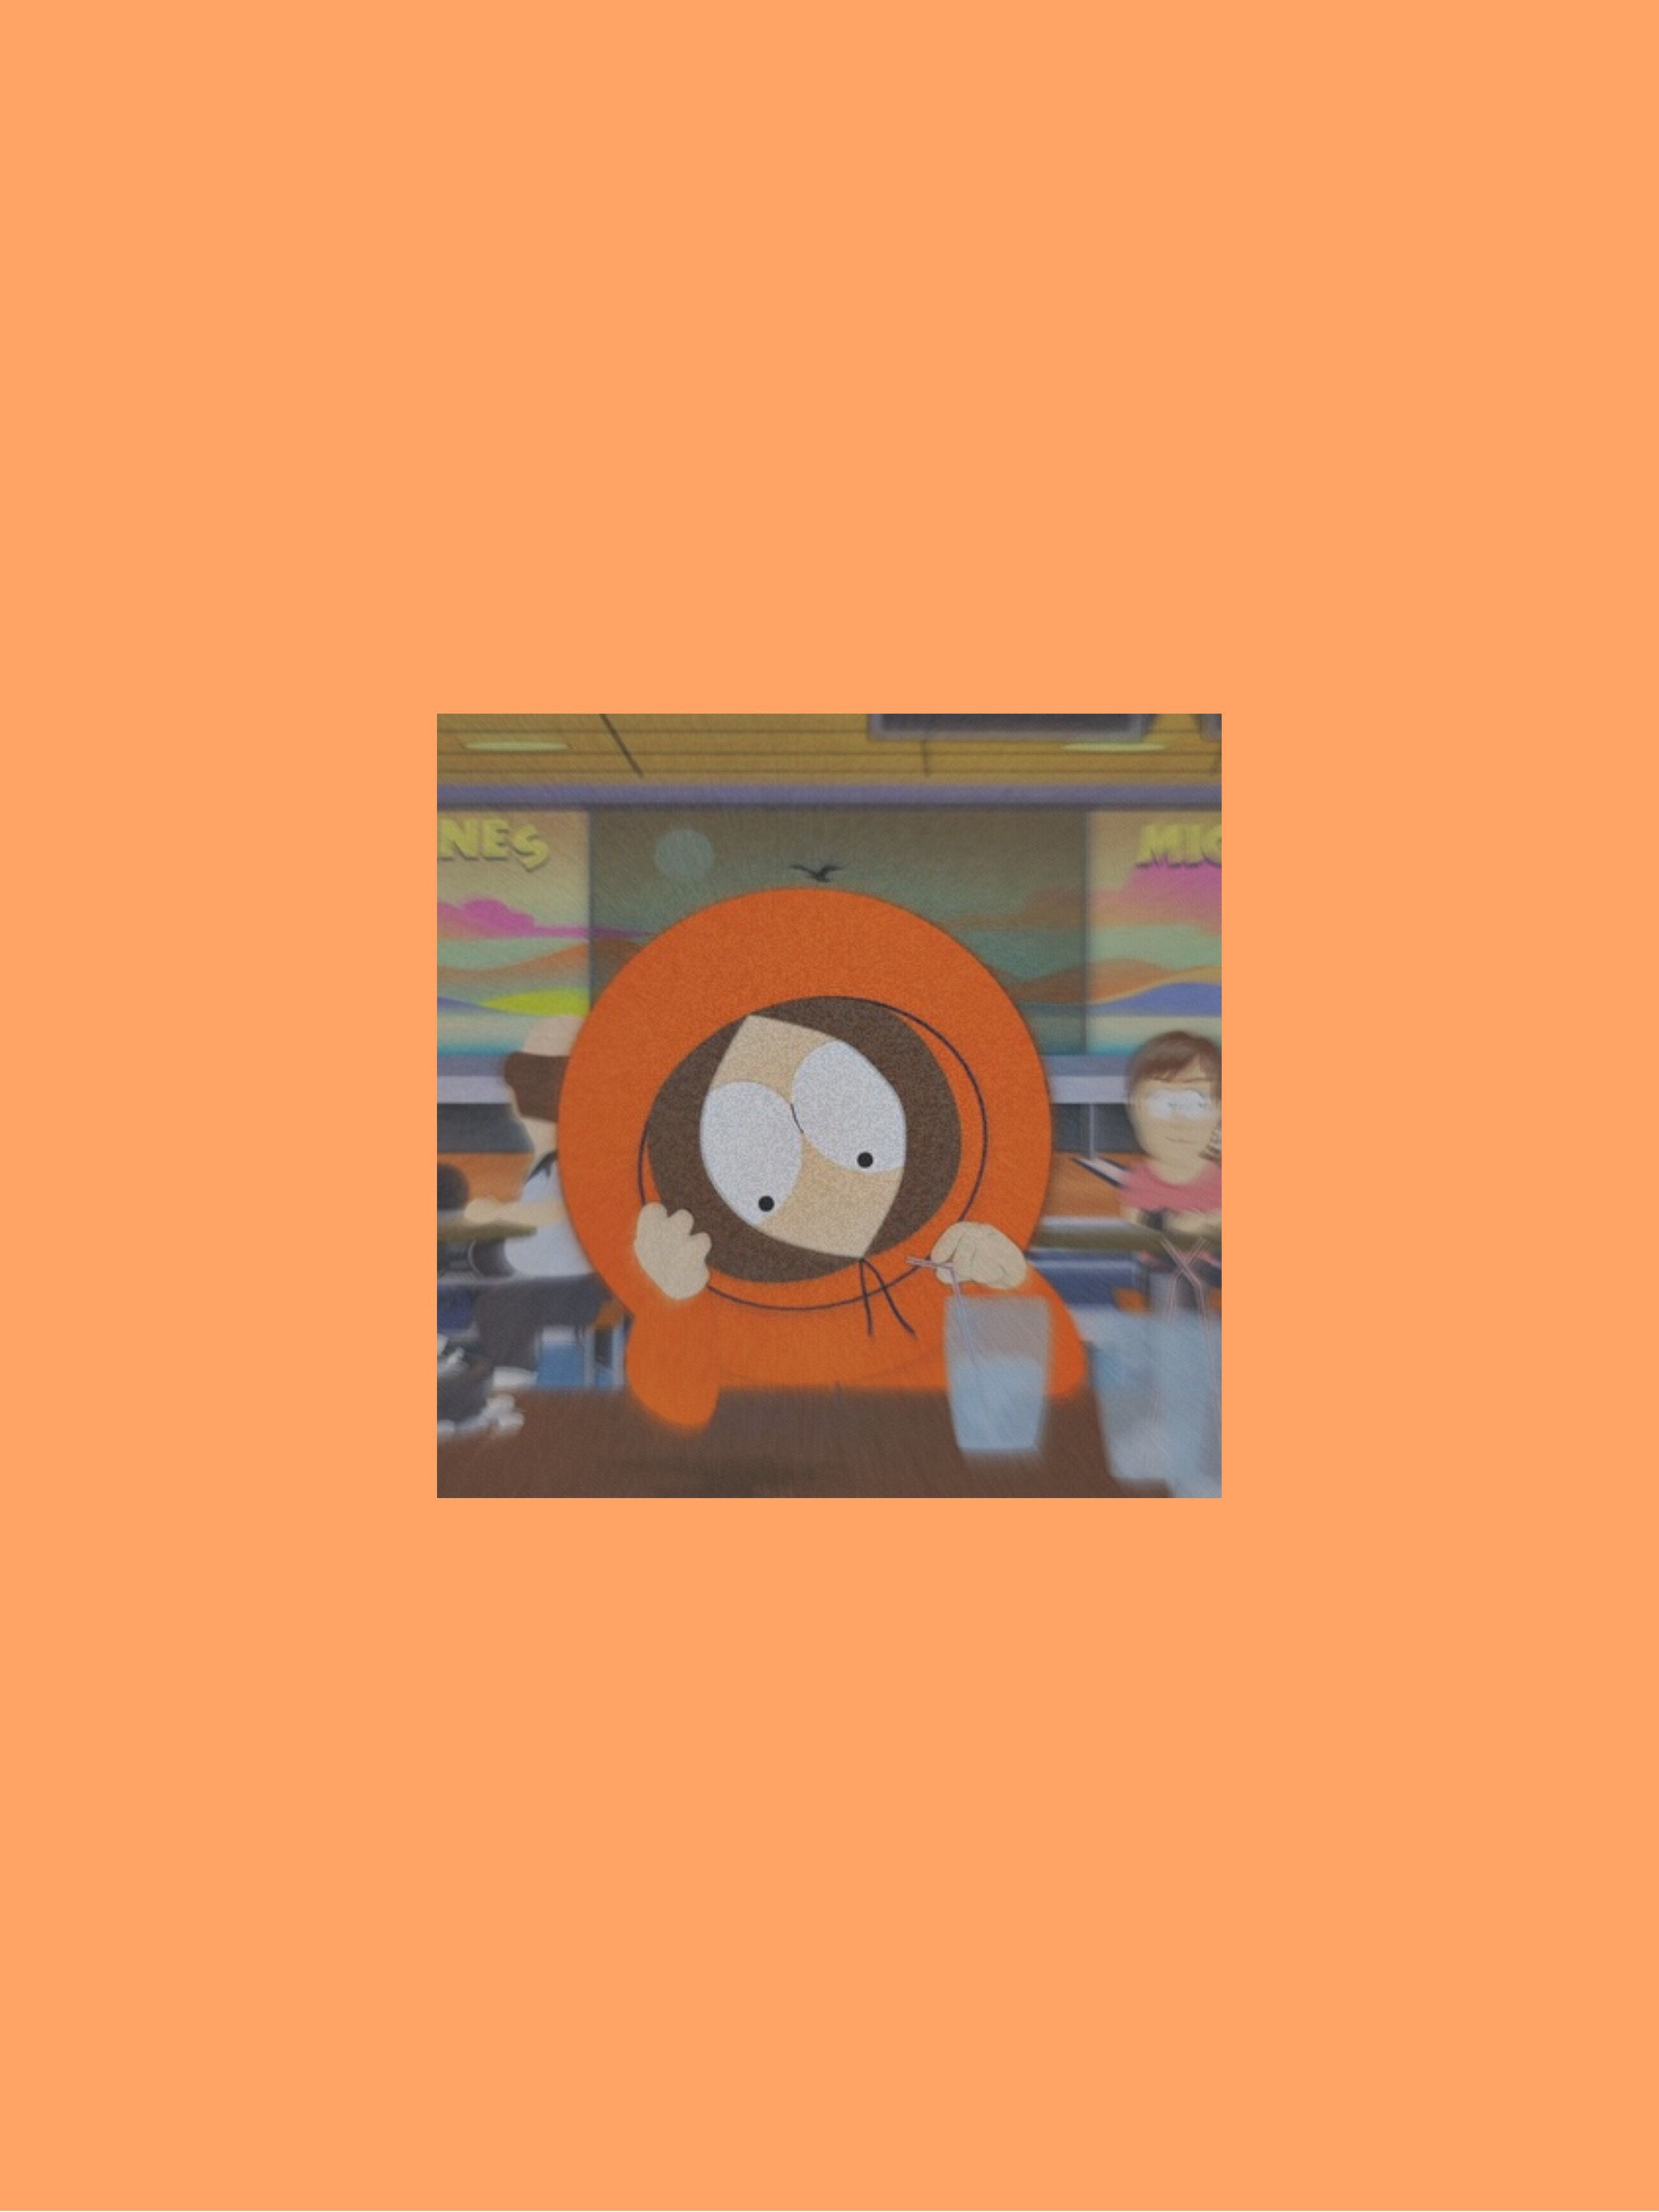 Kenny McCormick Wallpapers  Top 13 Best Kenny McCormick Wallpapers  HQ 